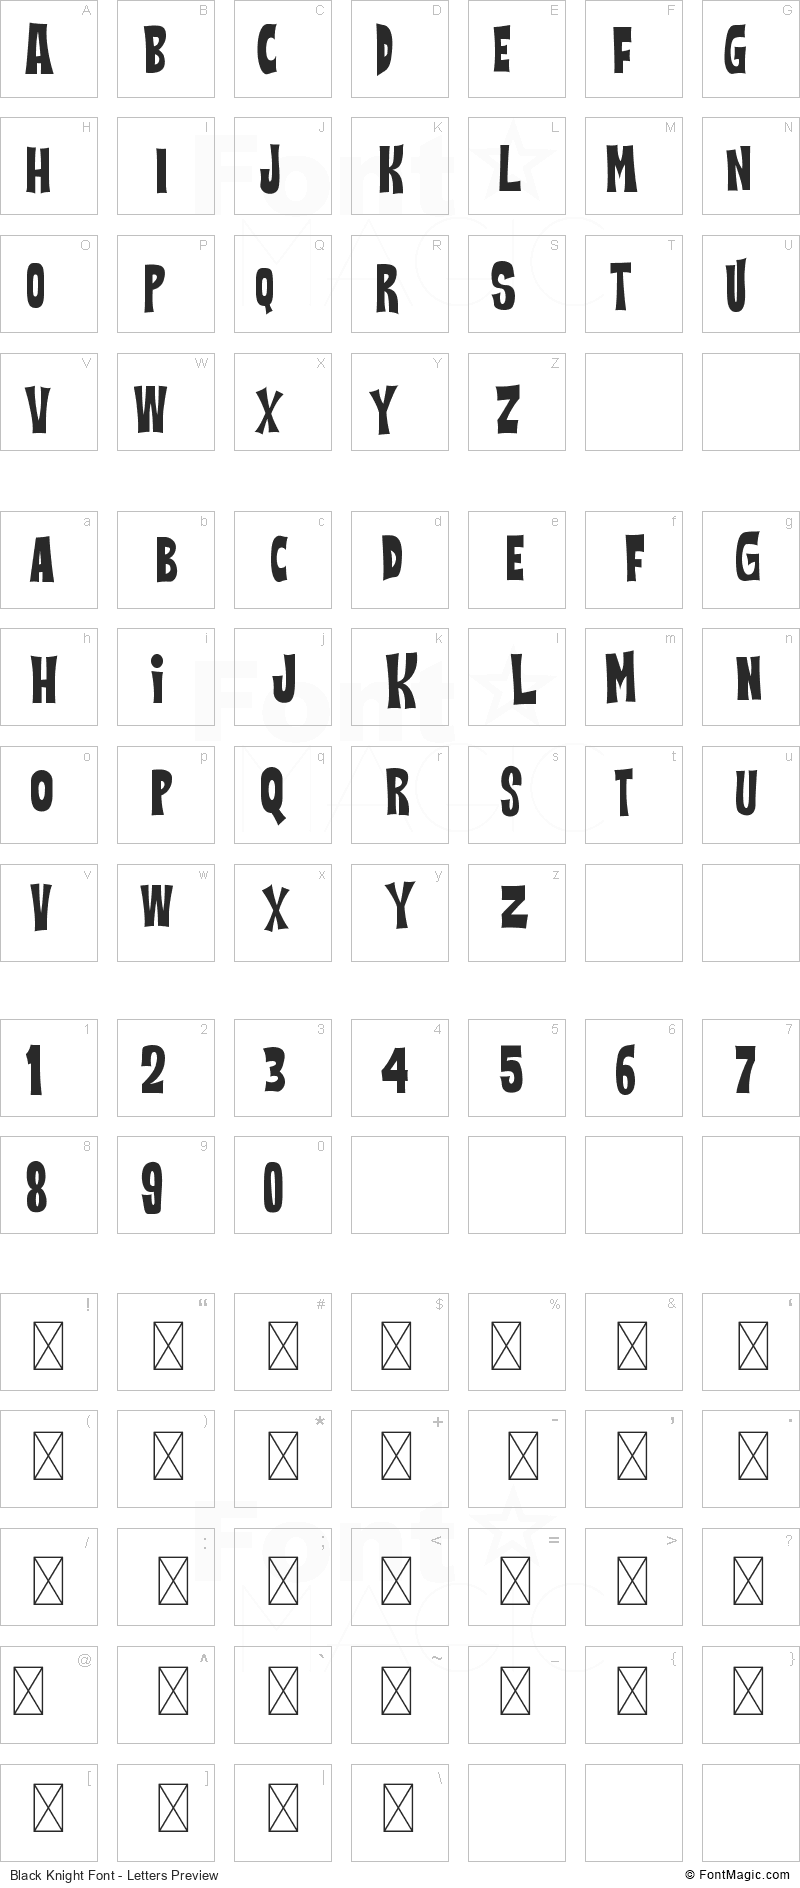 Black Knight Font - All Latters Preview Chart